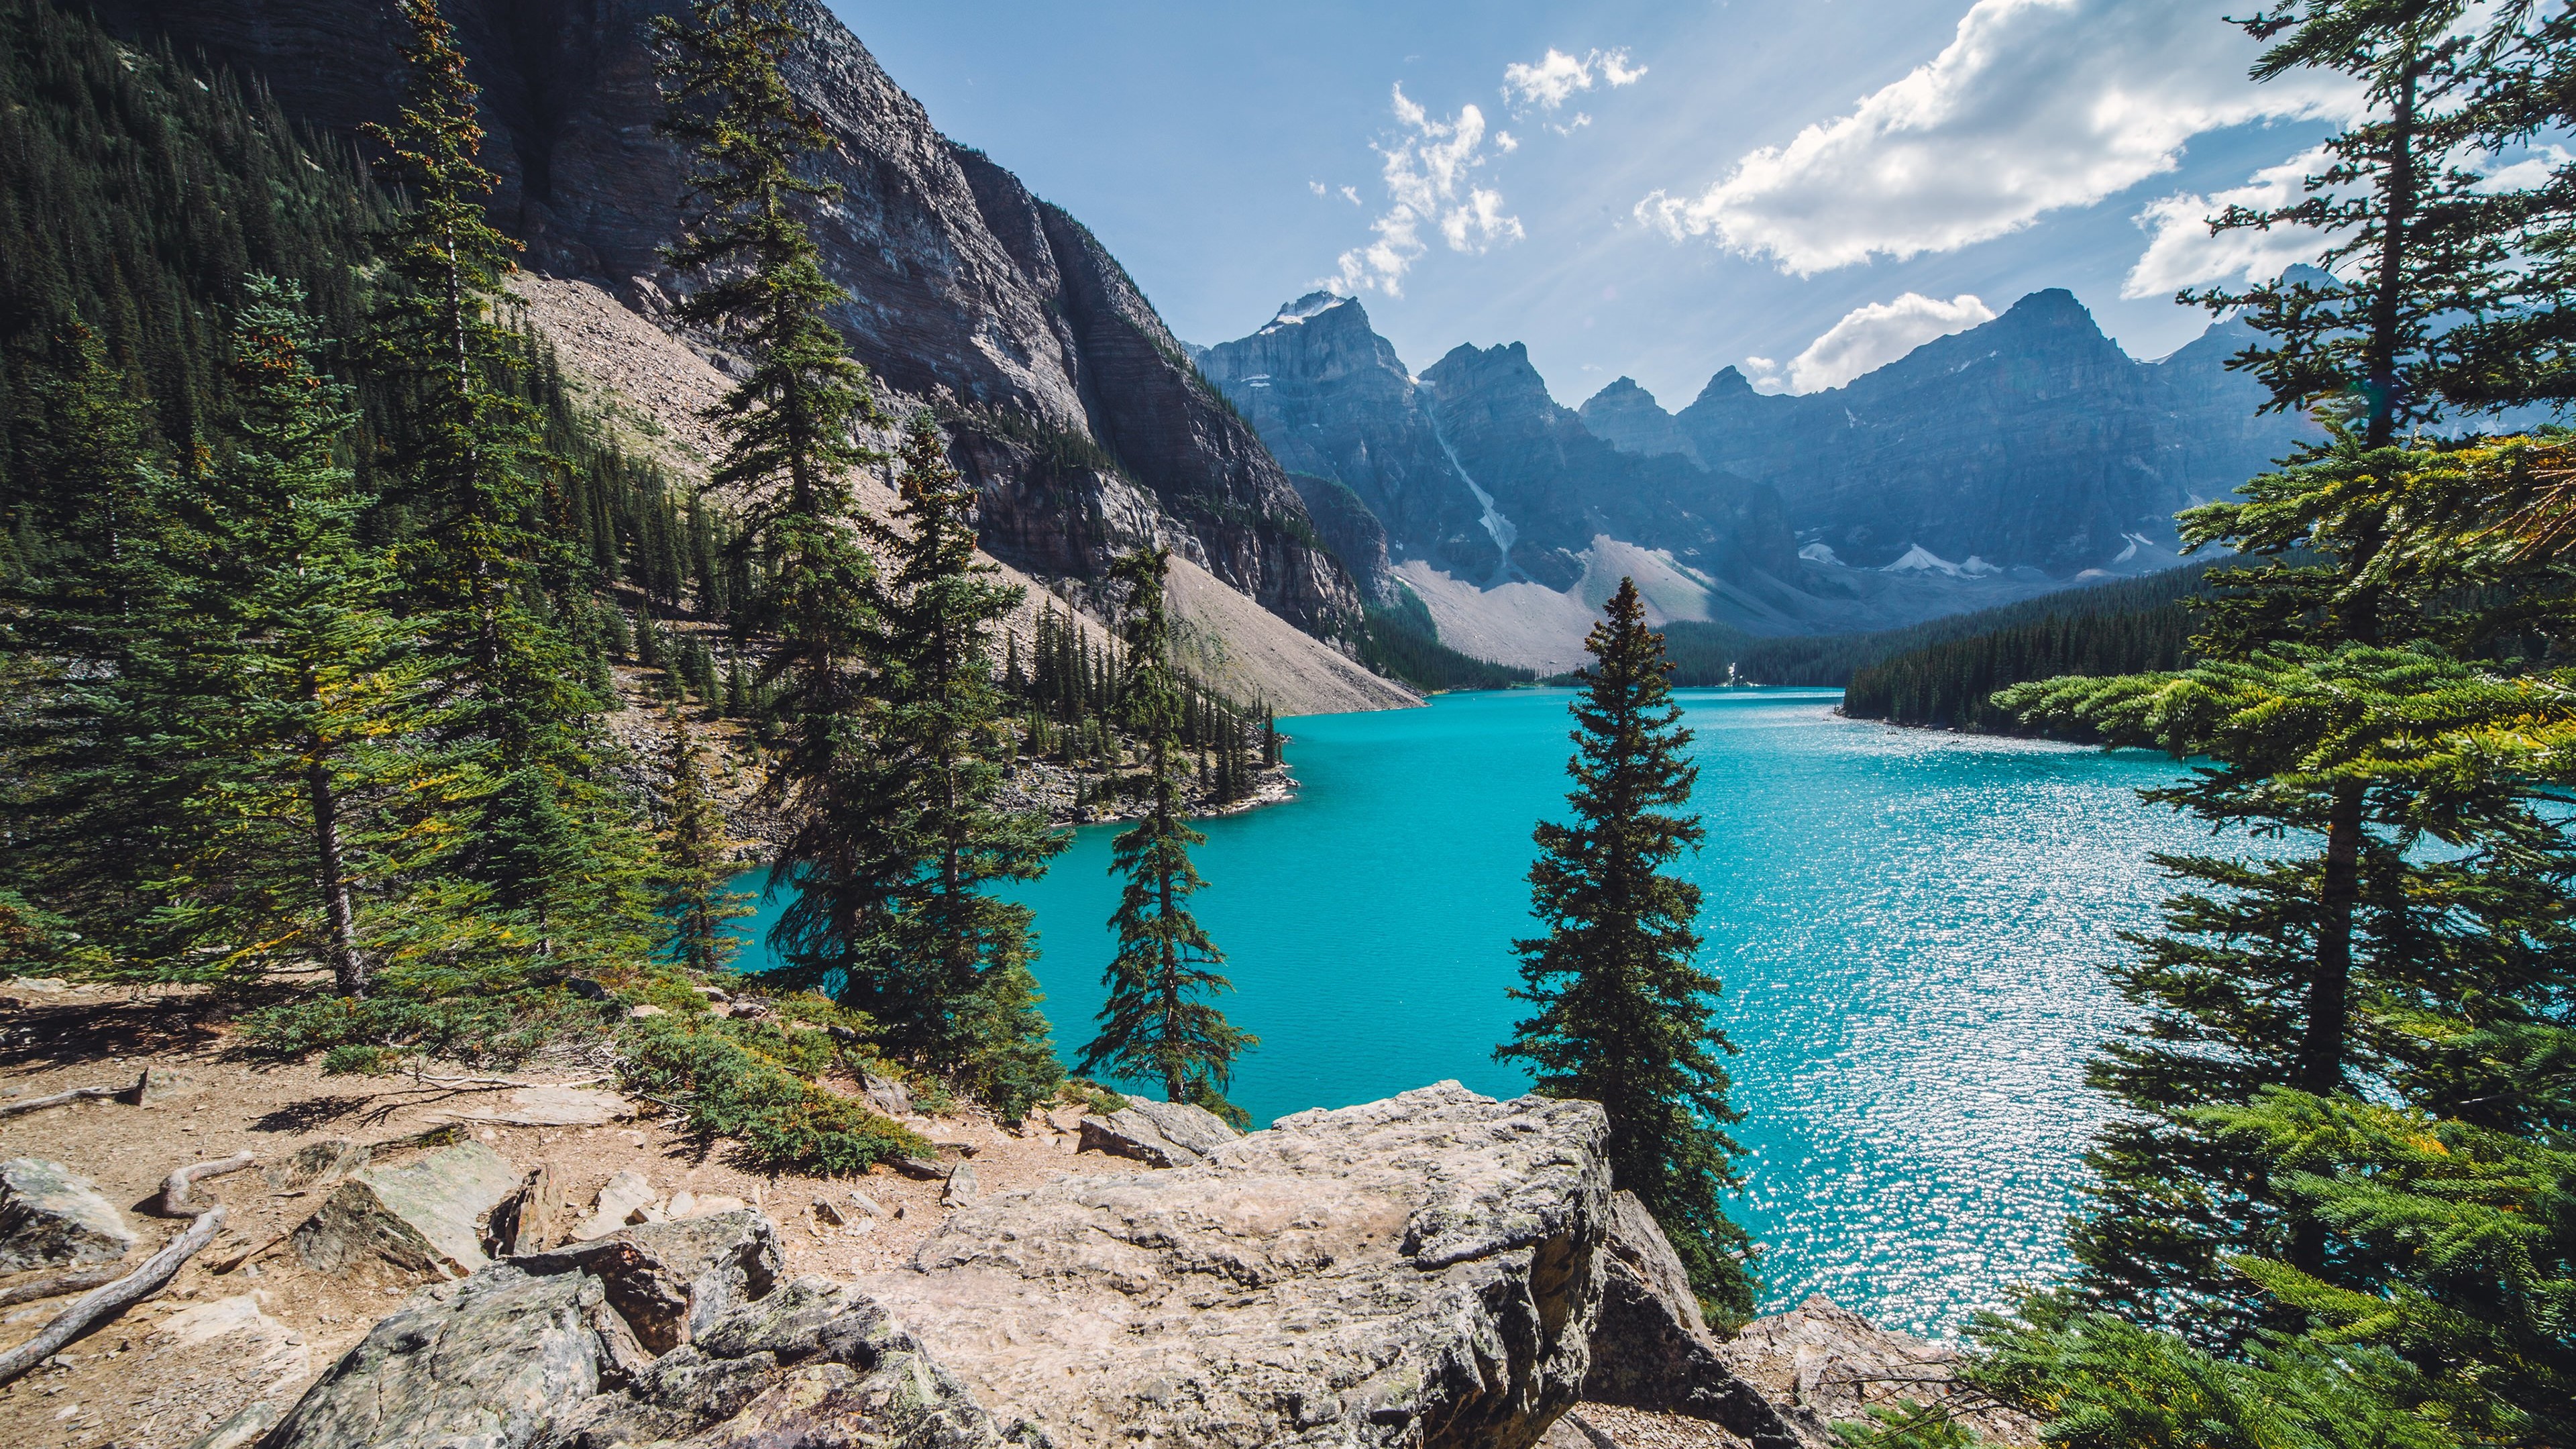 download-sunny-day-over-moraine-lake-hd-wallpaper-for-4k-3840-x-2160